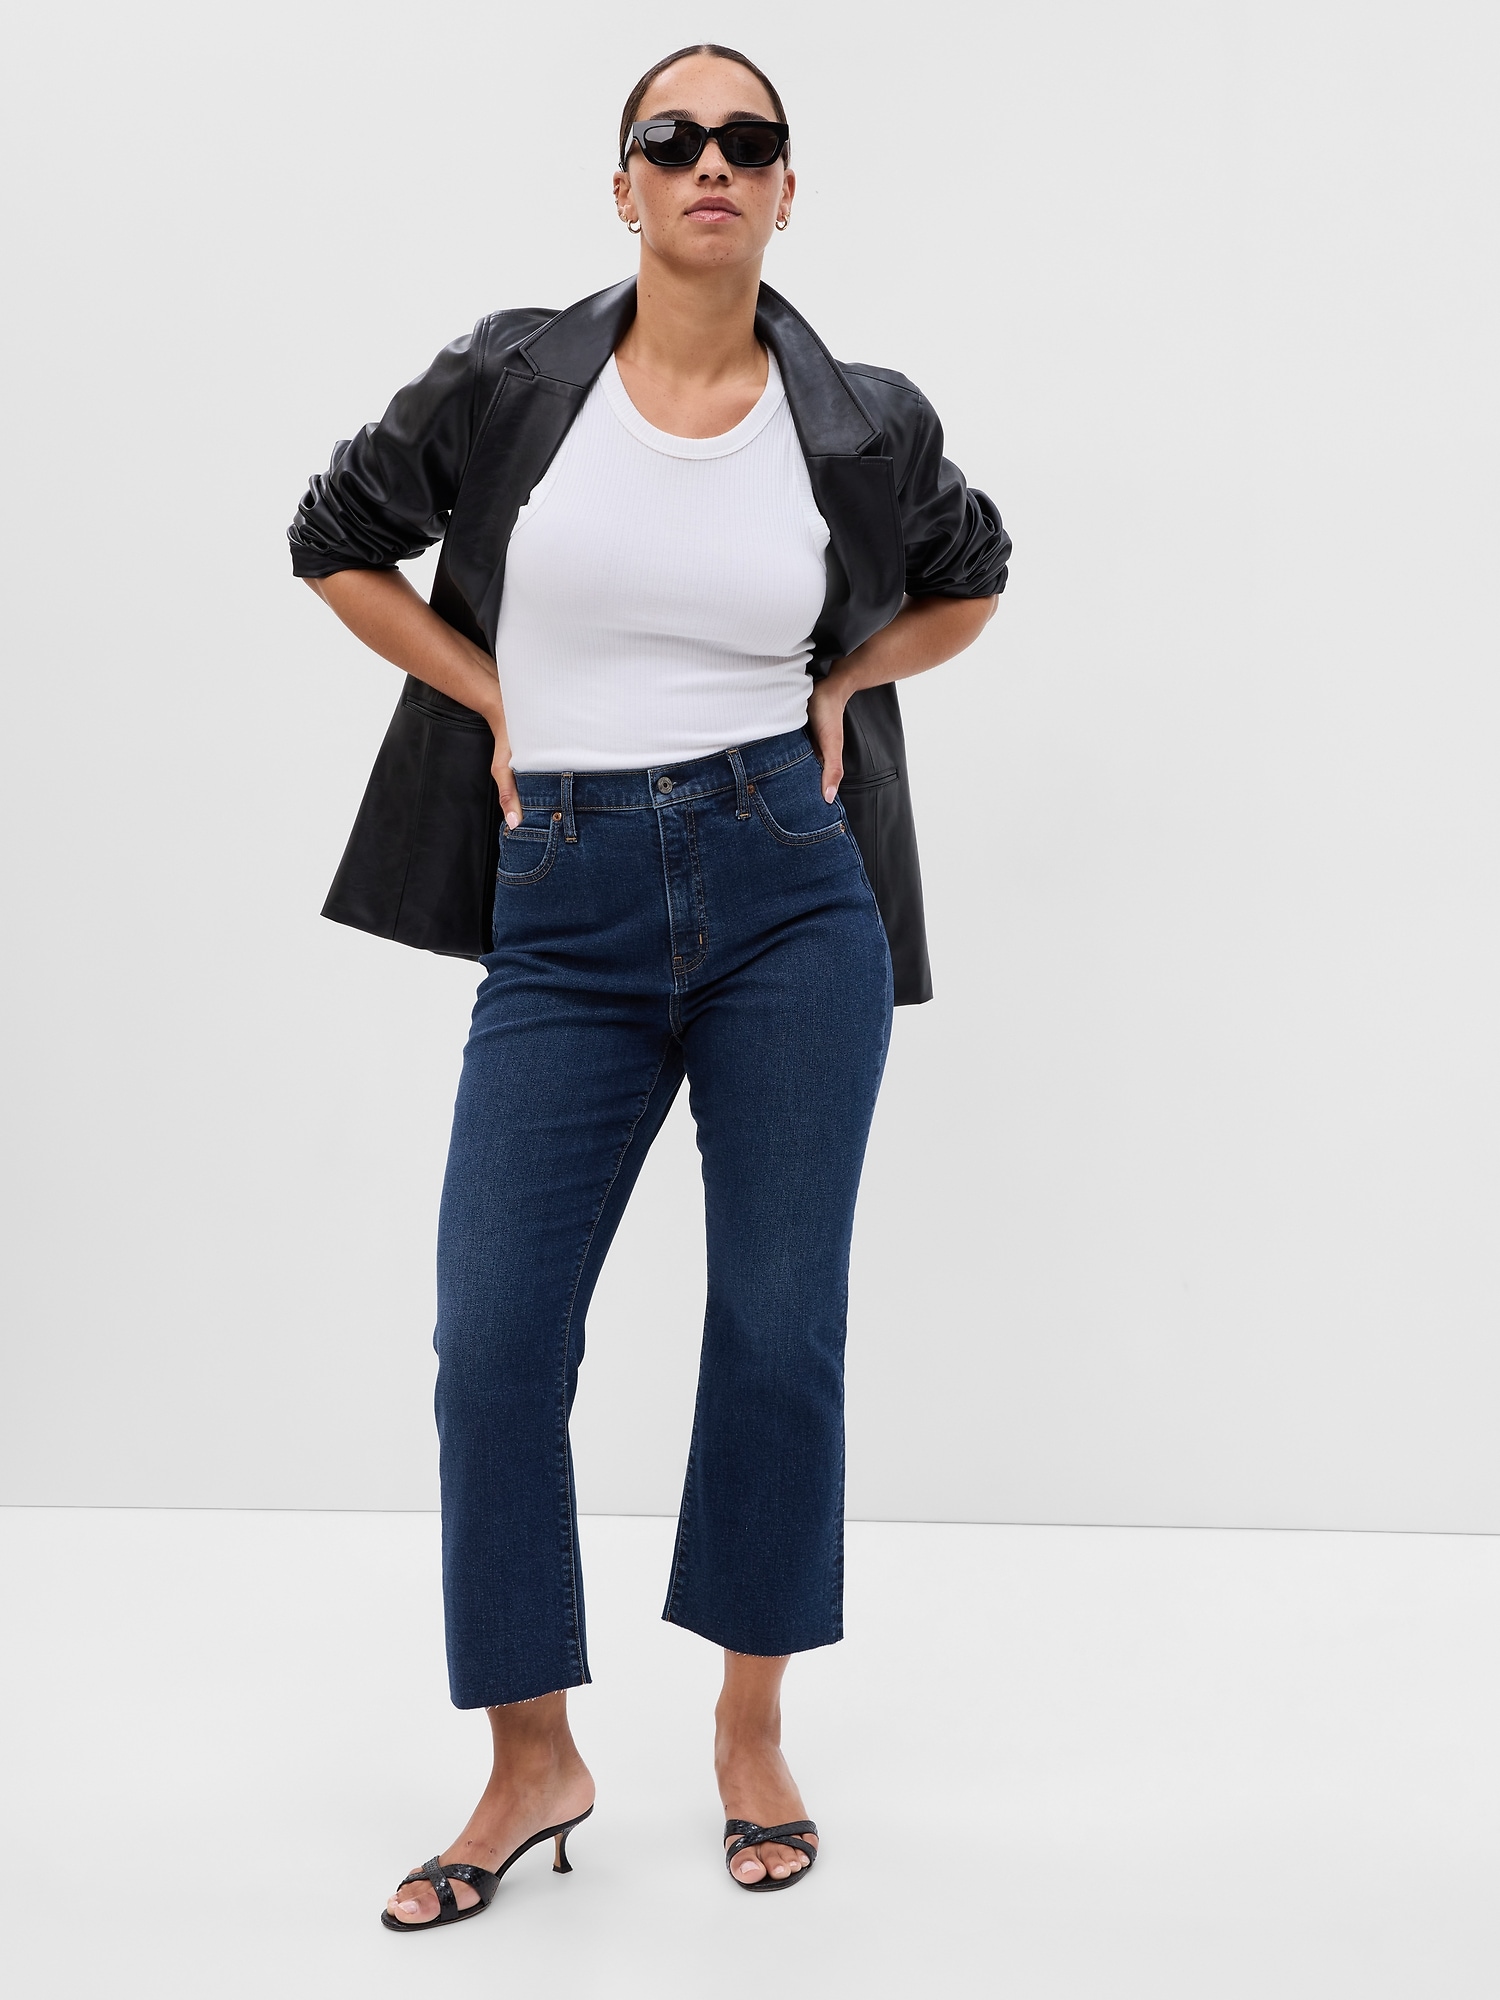 Style & Fit Review: Cropped Kick Flare Denim 